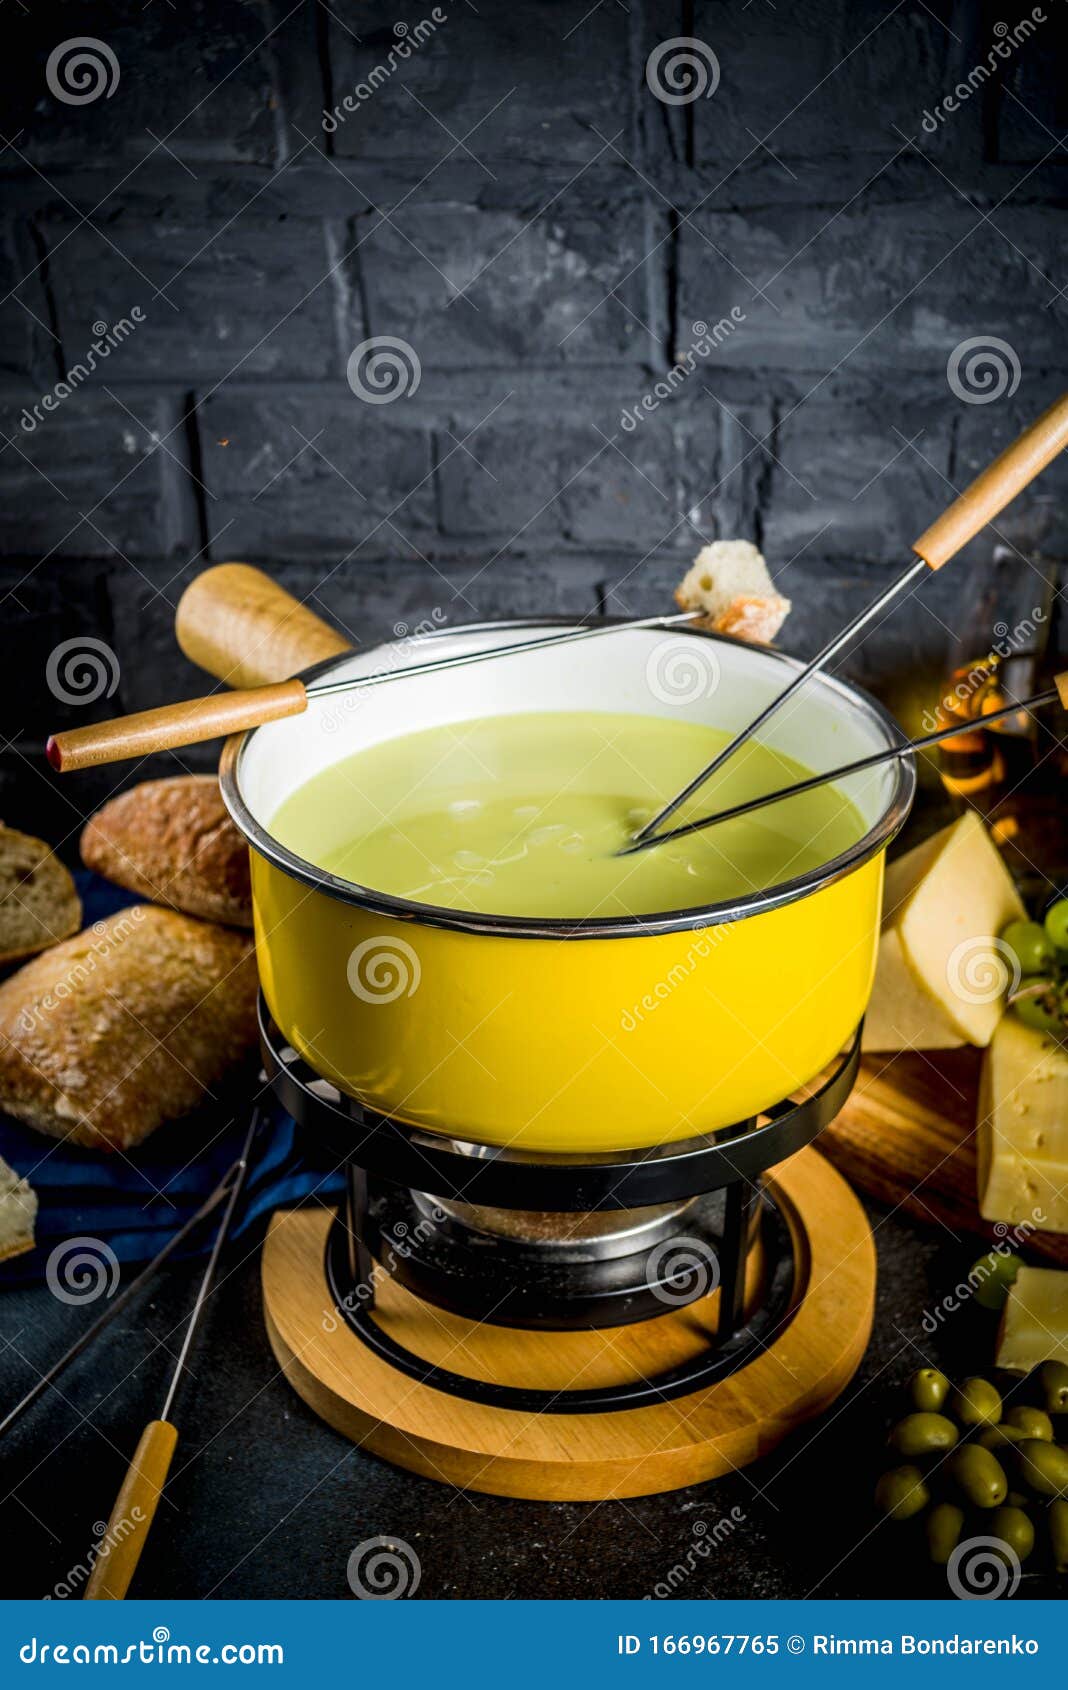 Classical Swiss Cheese Fondue Stock Image - Image of gourmet, evening ...